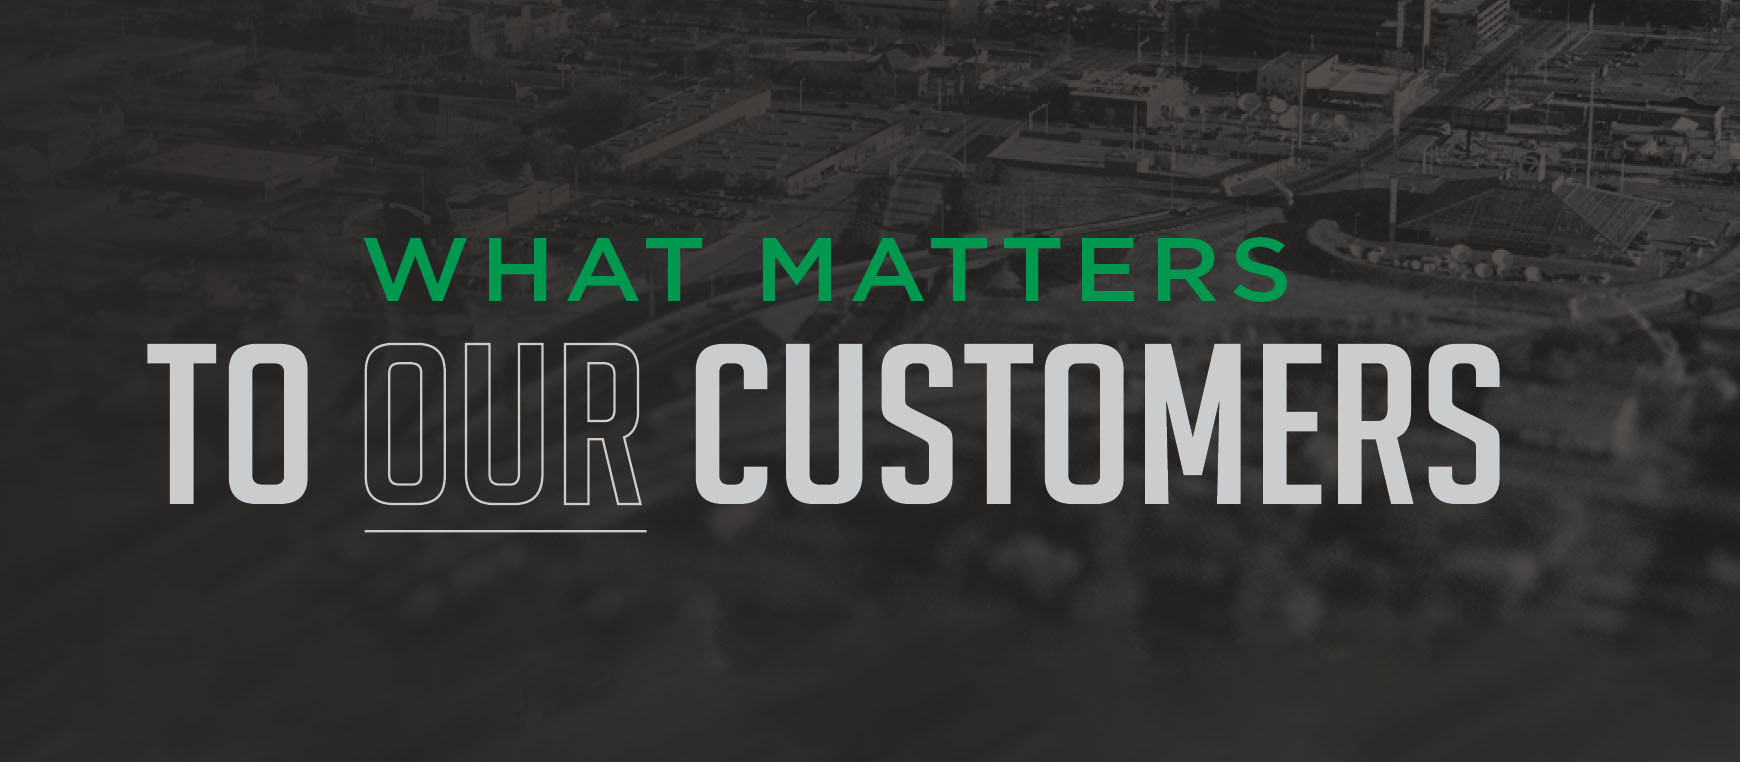 What matters to our customers